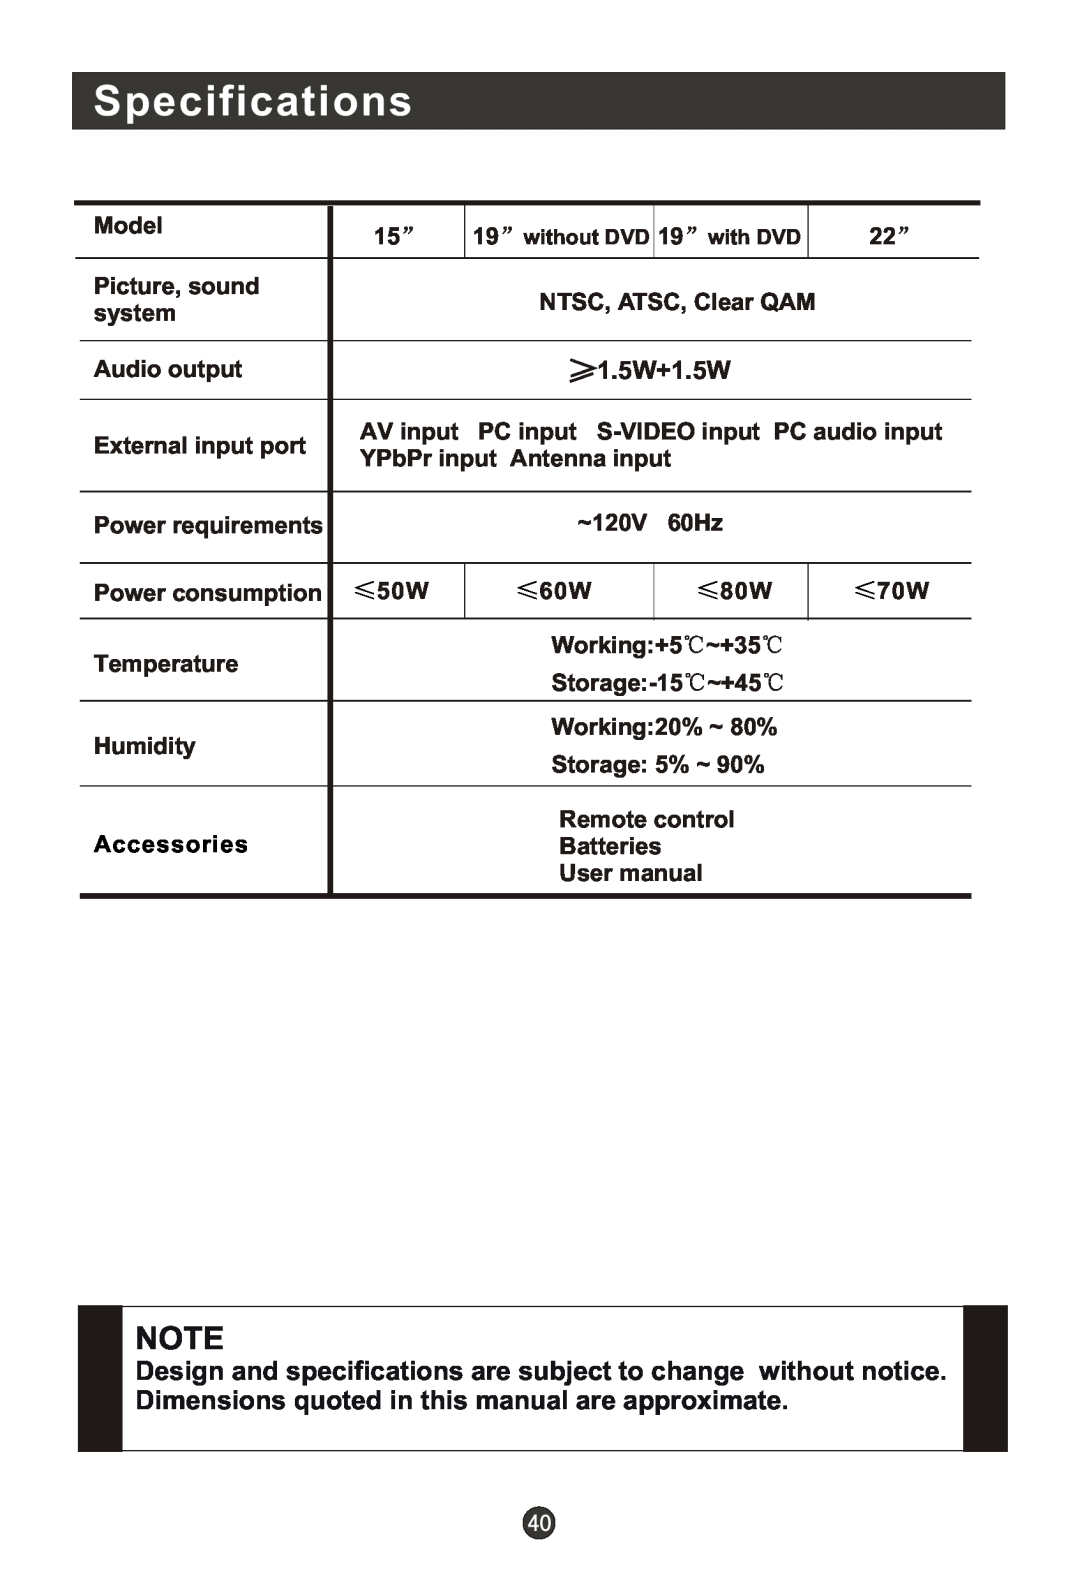 Haier HLC19R Specifications, 1.5W+1.5W, Model, Picture, sound, NTSC, ATSC, Clear QAM, system, Audio output, AV input, ~+35 